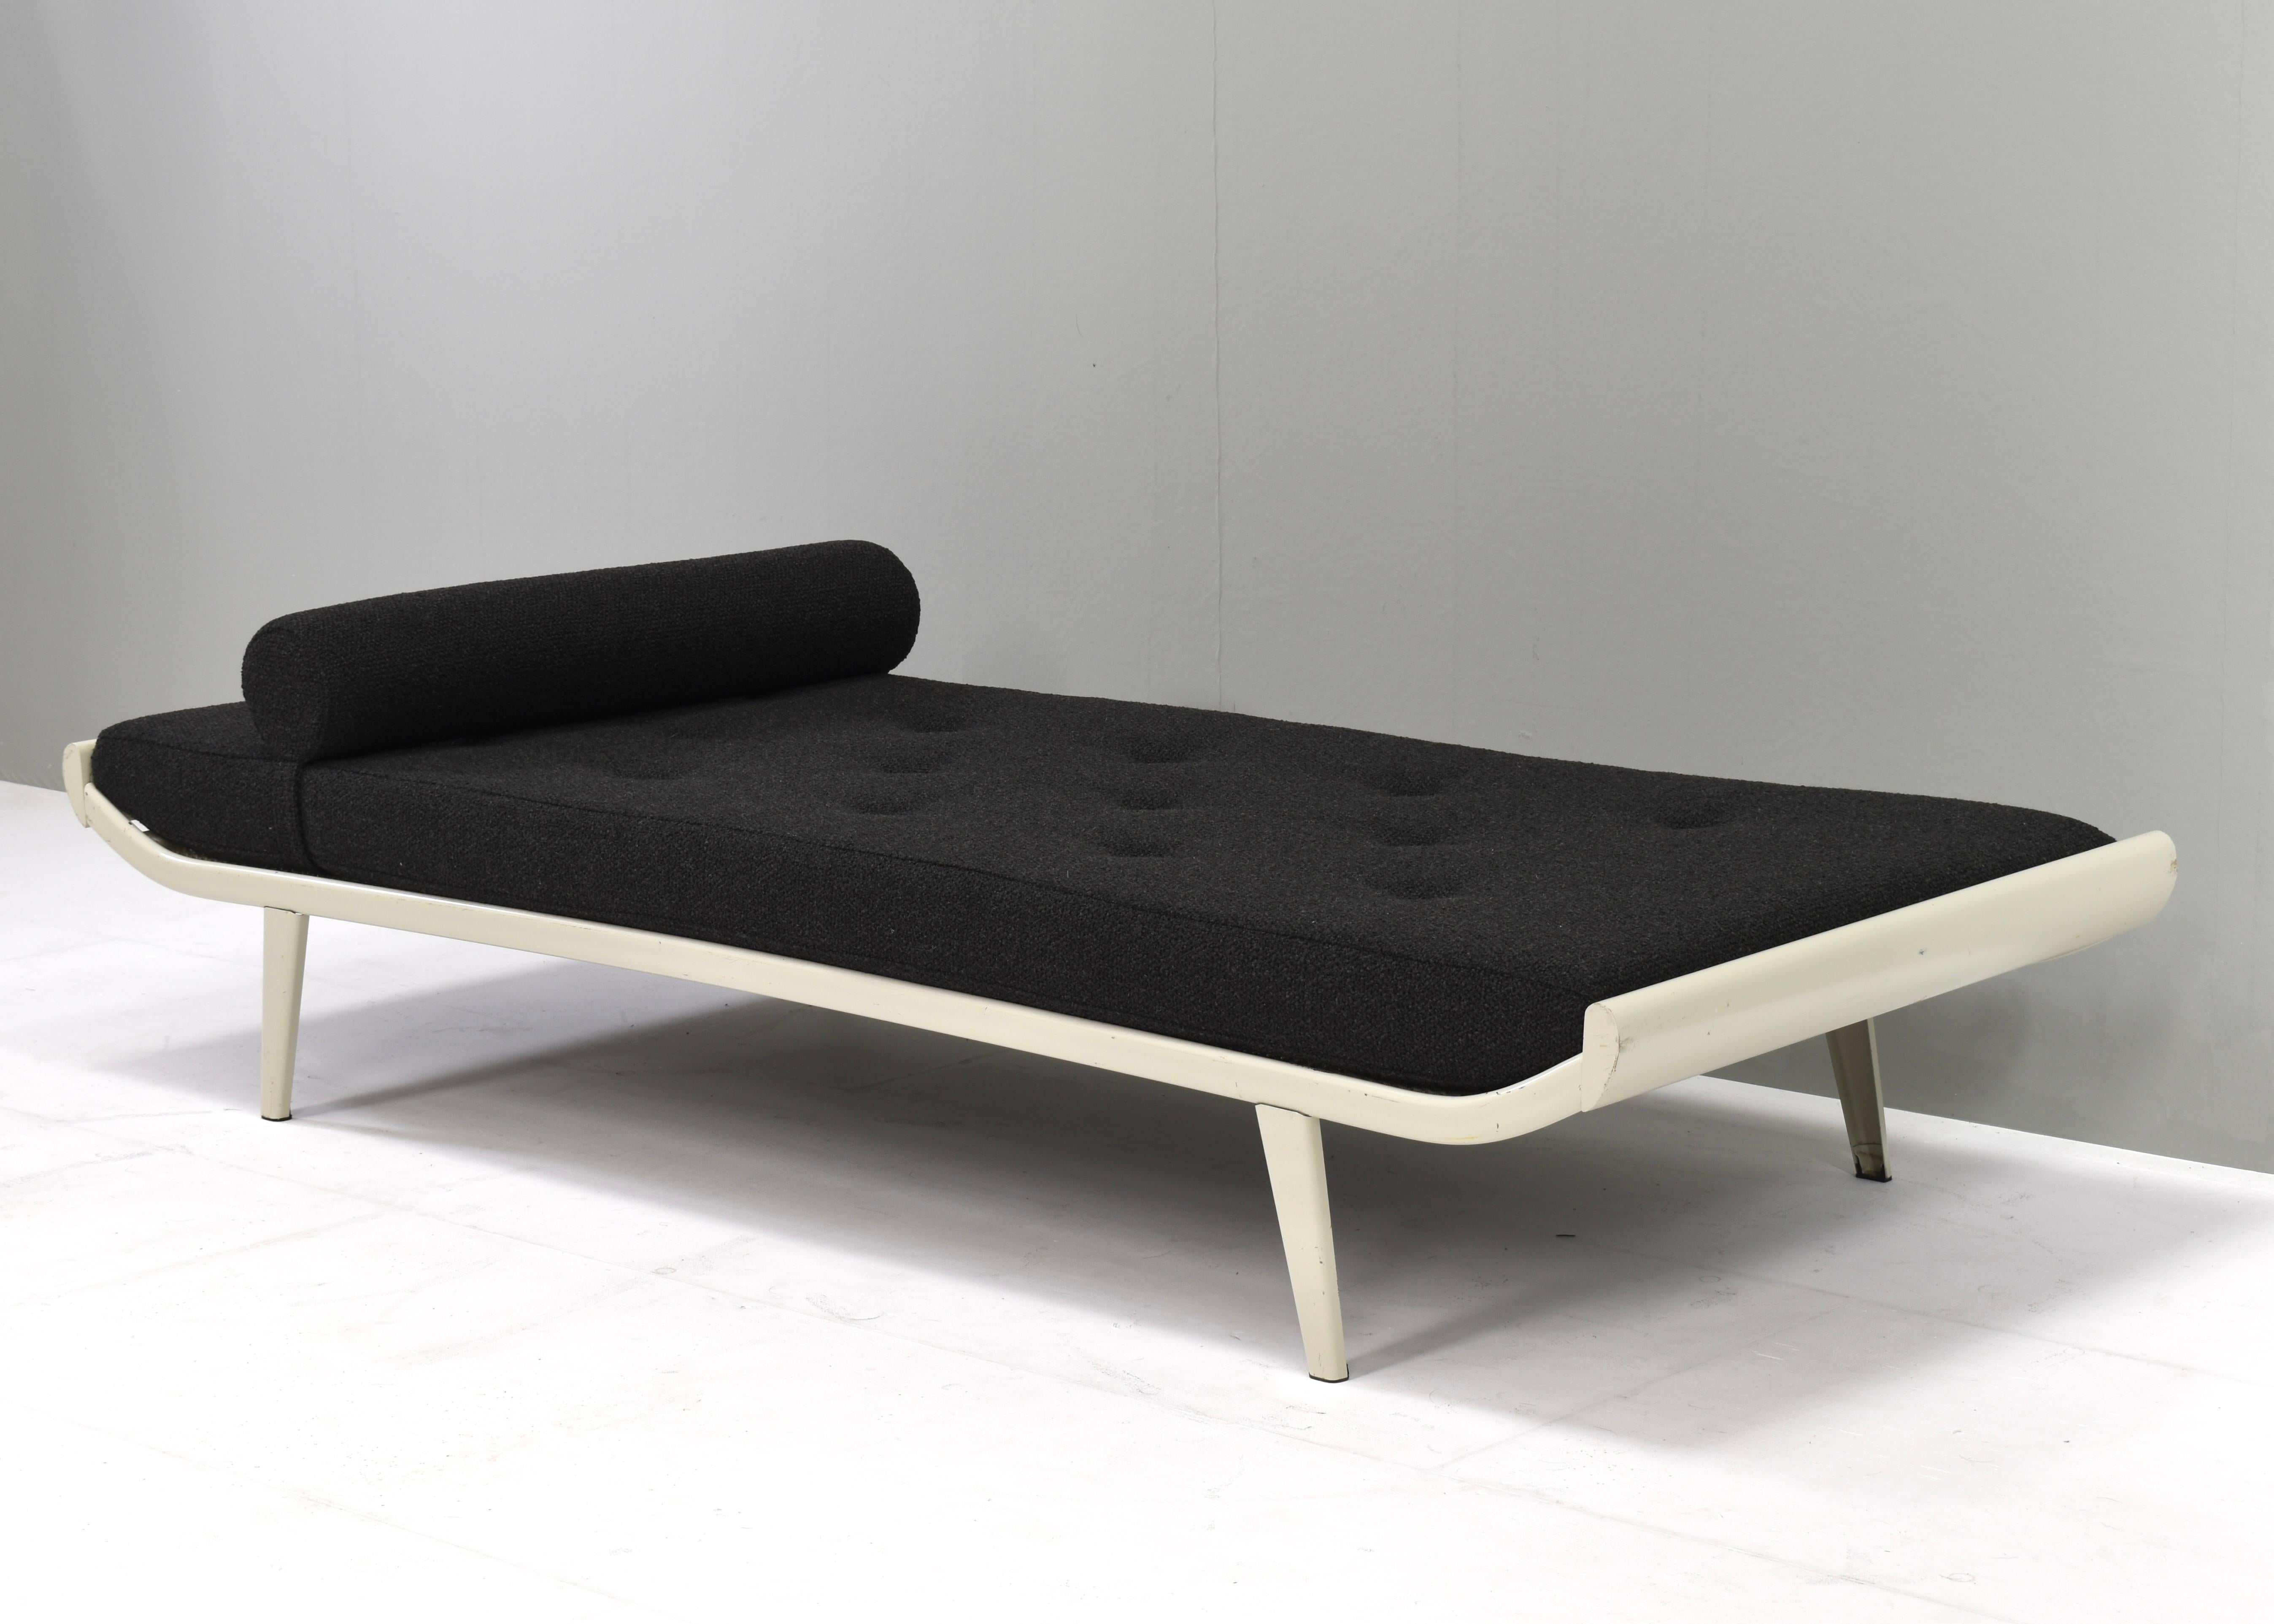 New upholstered daybed by Dick Cordemeijer for Auping, Netherlands – 1953.
The Cleopatra daybed has a new mattress and black bouclé fabric by De Ploegstof model Monza.
In very good condition.
Designer: Dick Cordemeijer
Manufacturer: